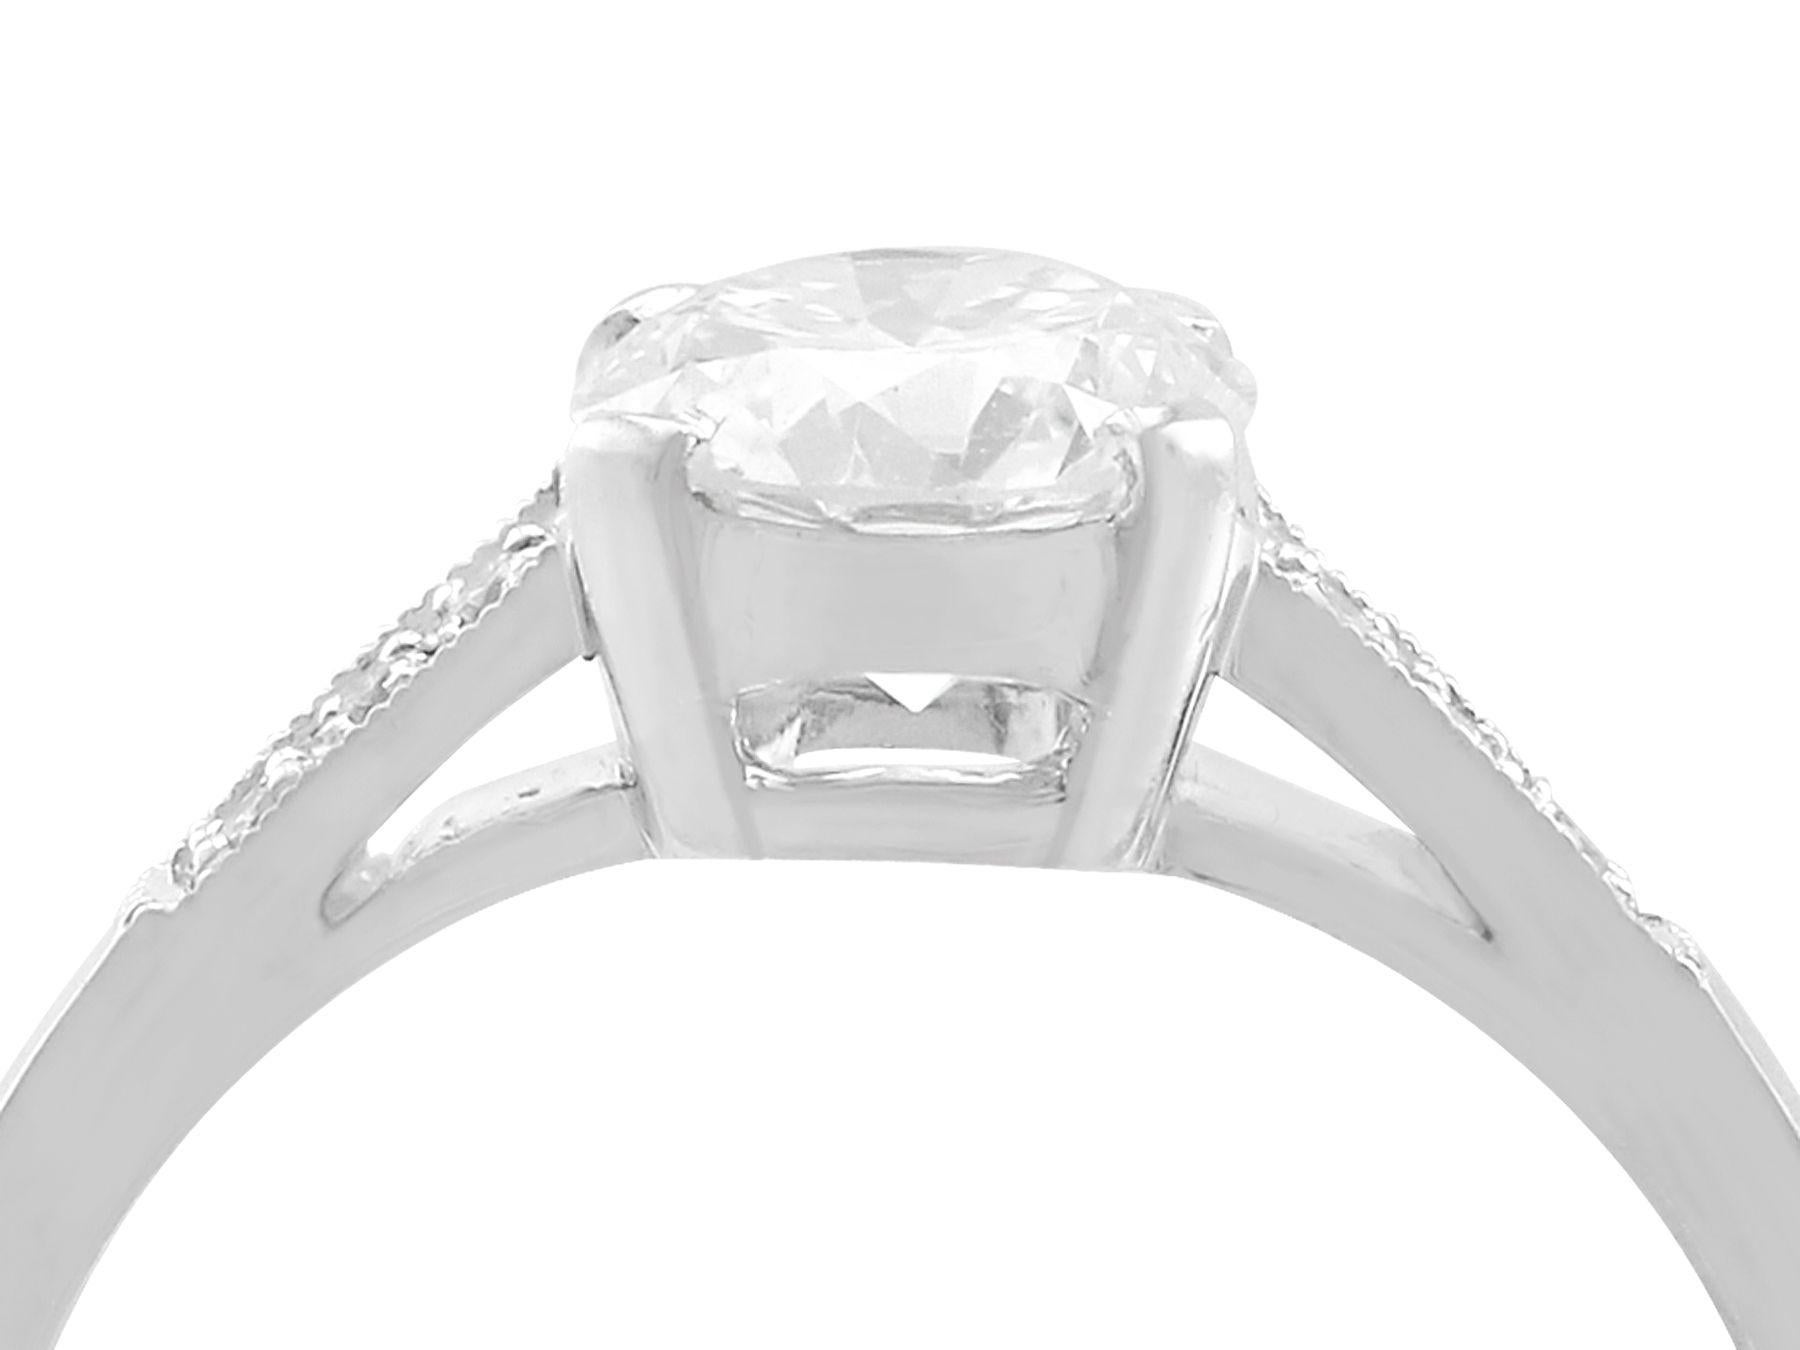 A stunning, fine and impressive vintage 1.02 carat diamond (total) and contemporary platinum solitaire ring; part of our diamond jewelry/estate jewelry collections.

This fine and impressive 0.96 carat diamond ring has been crafted in platinum.

The